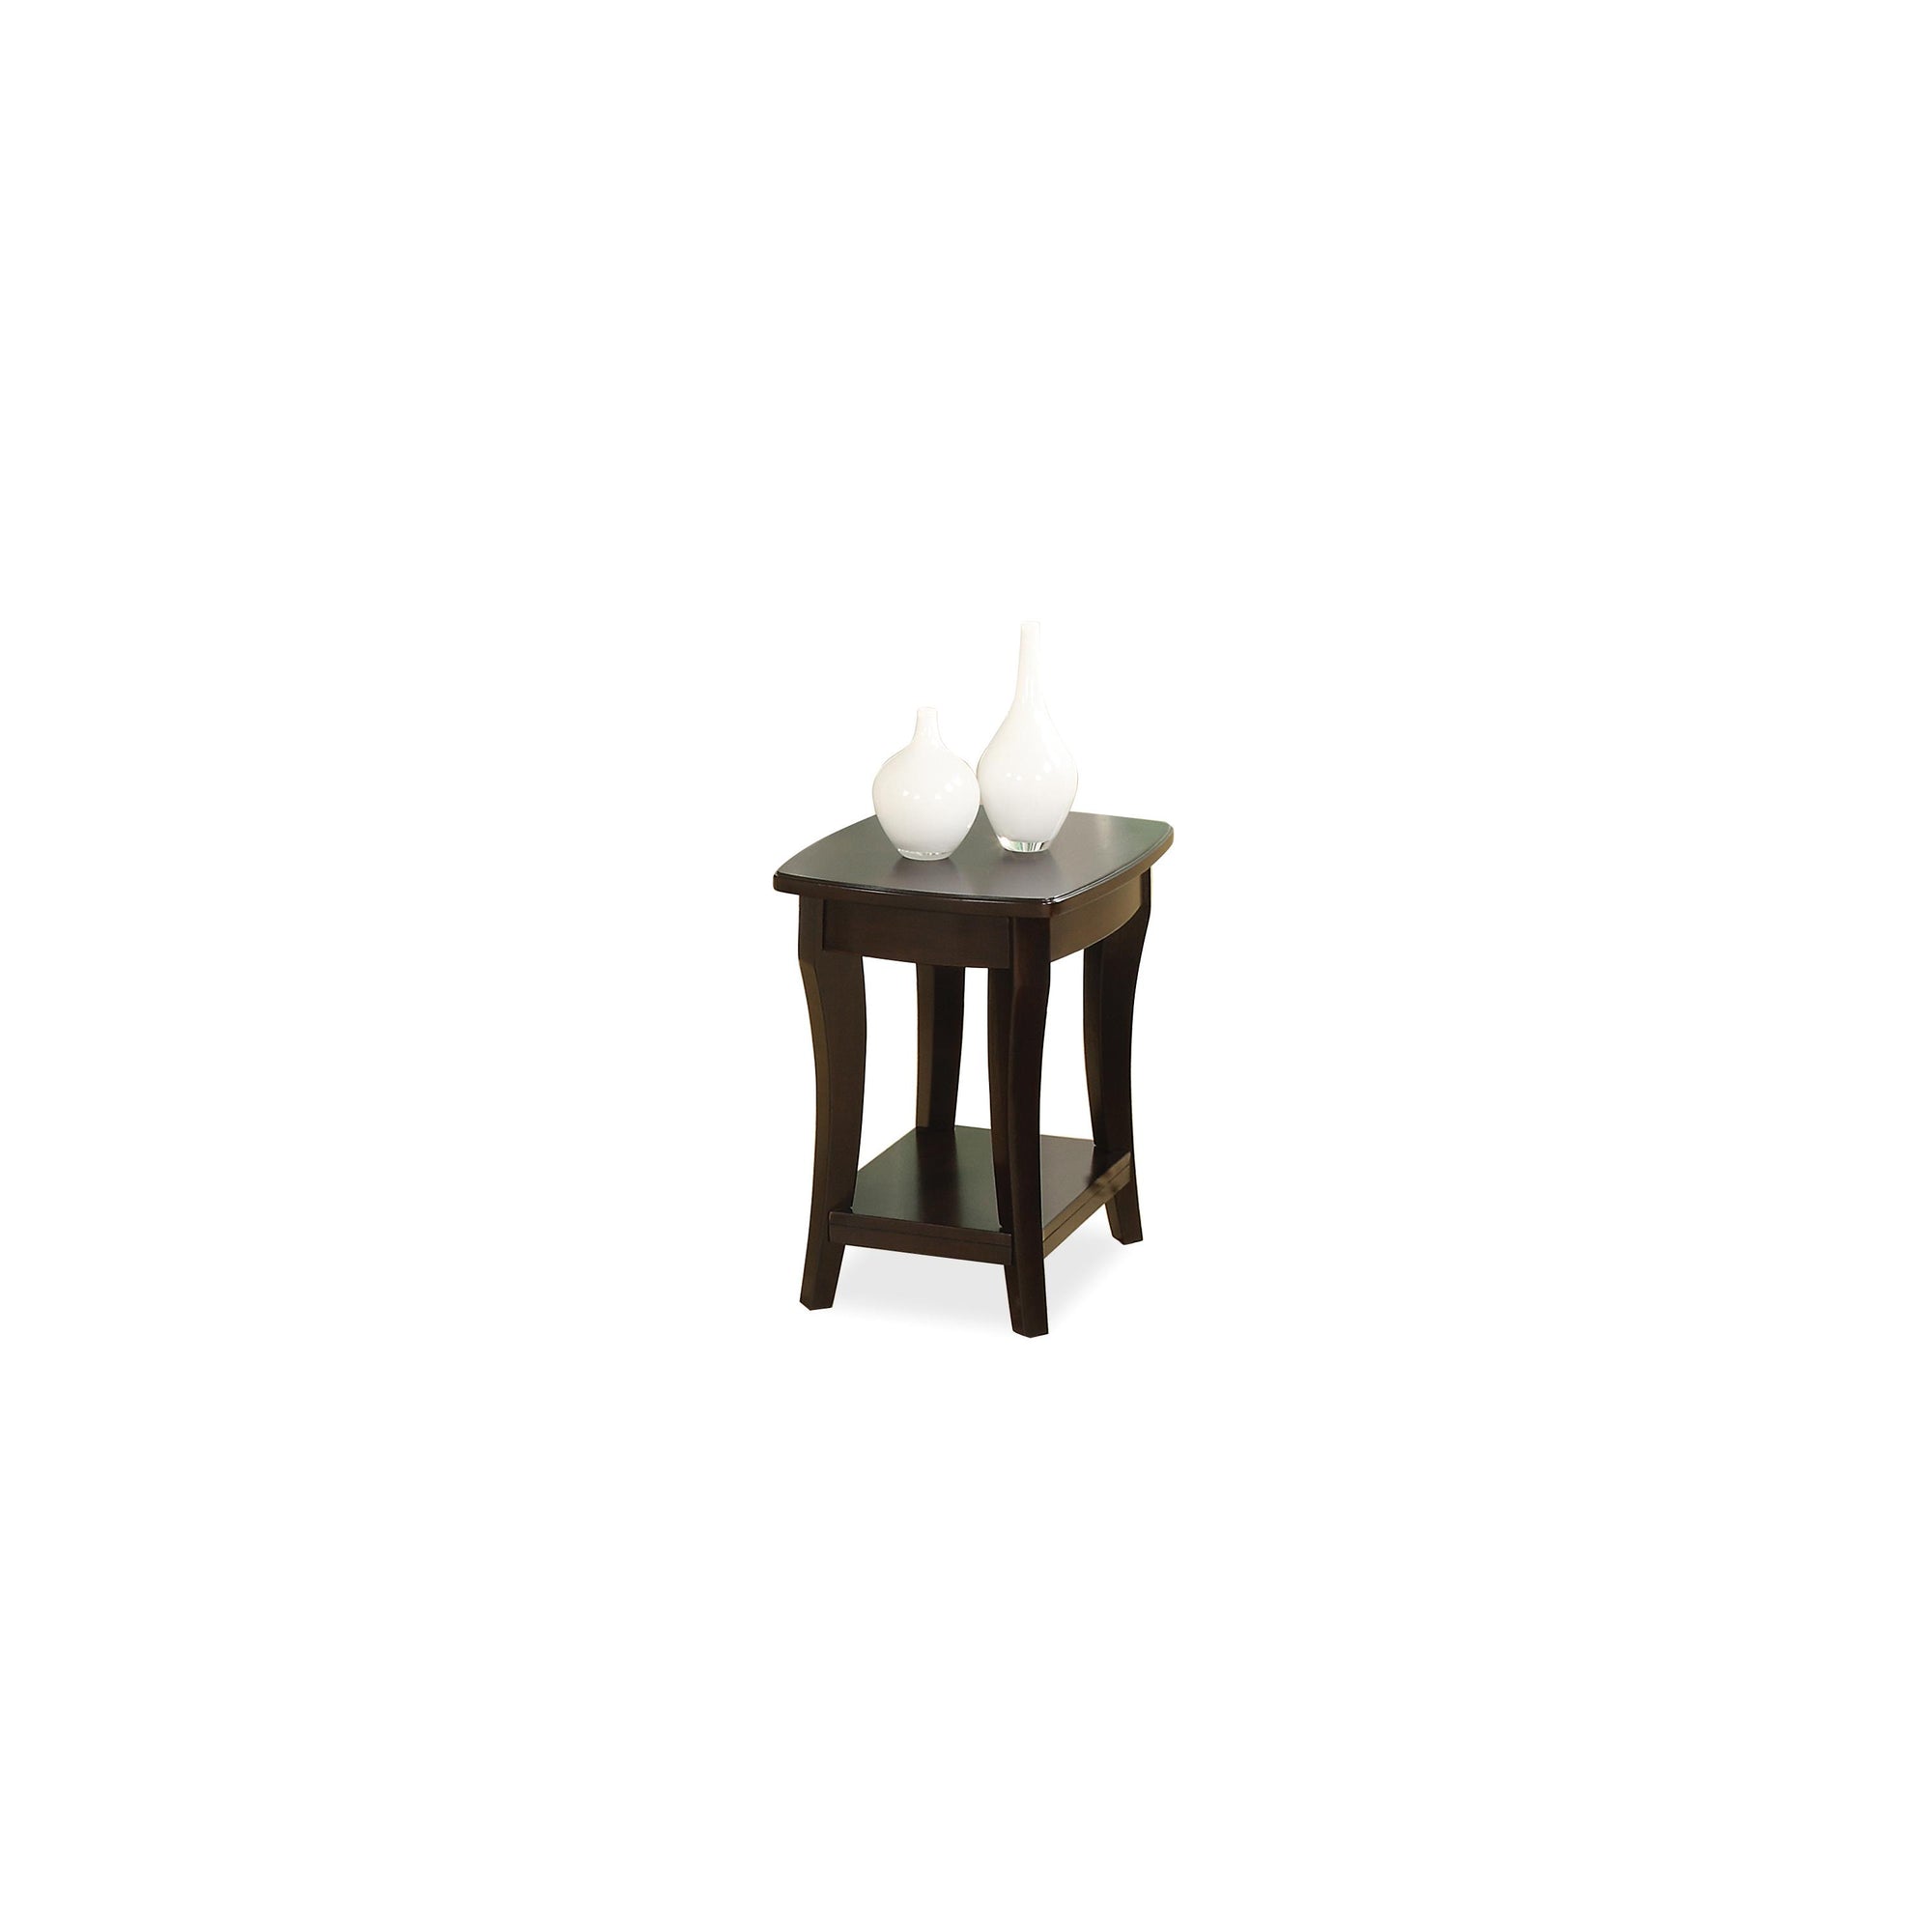 Annandale Chairside Table